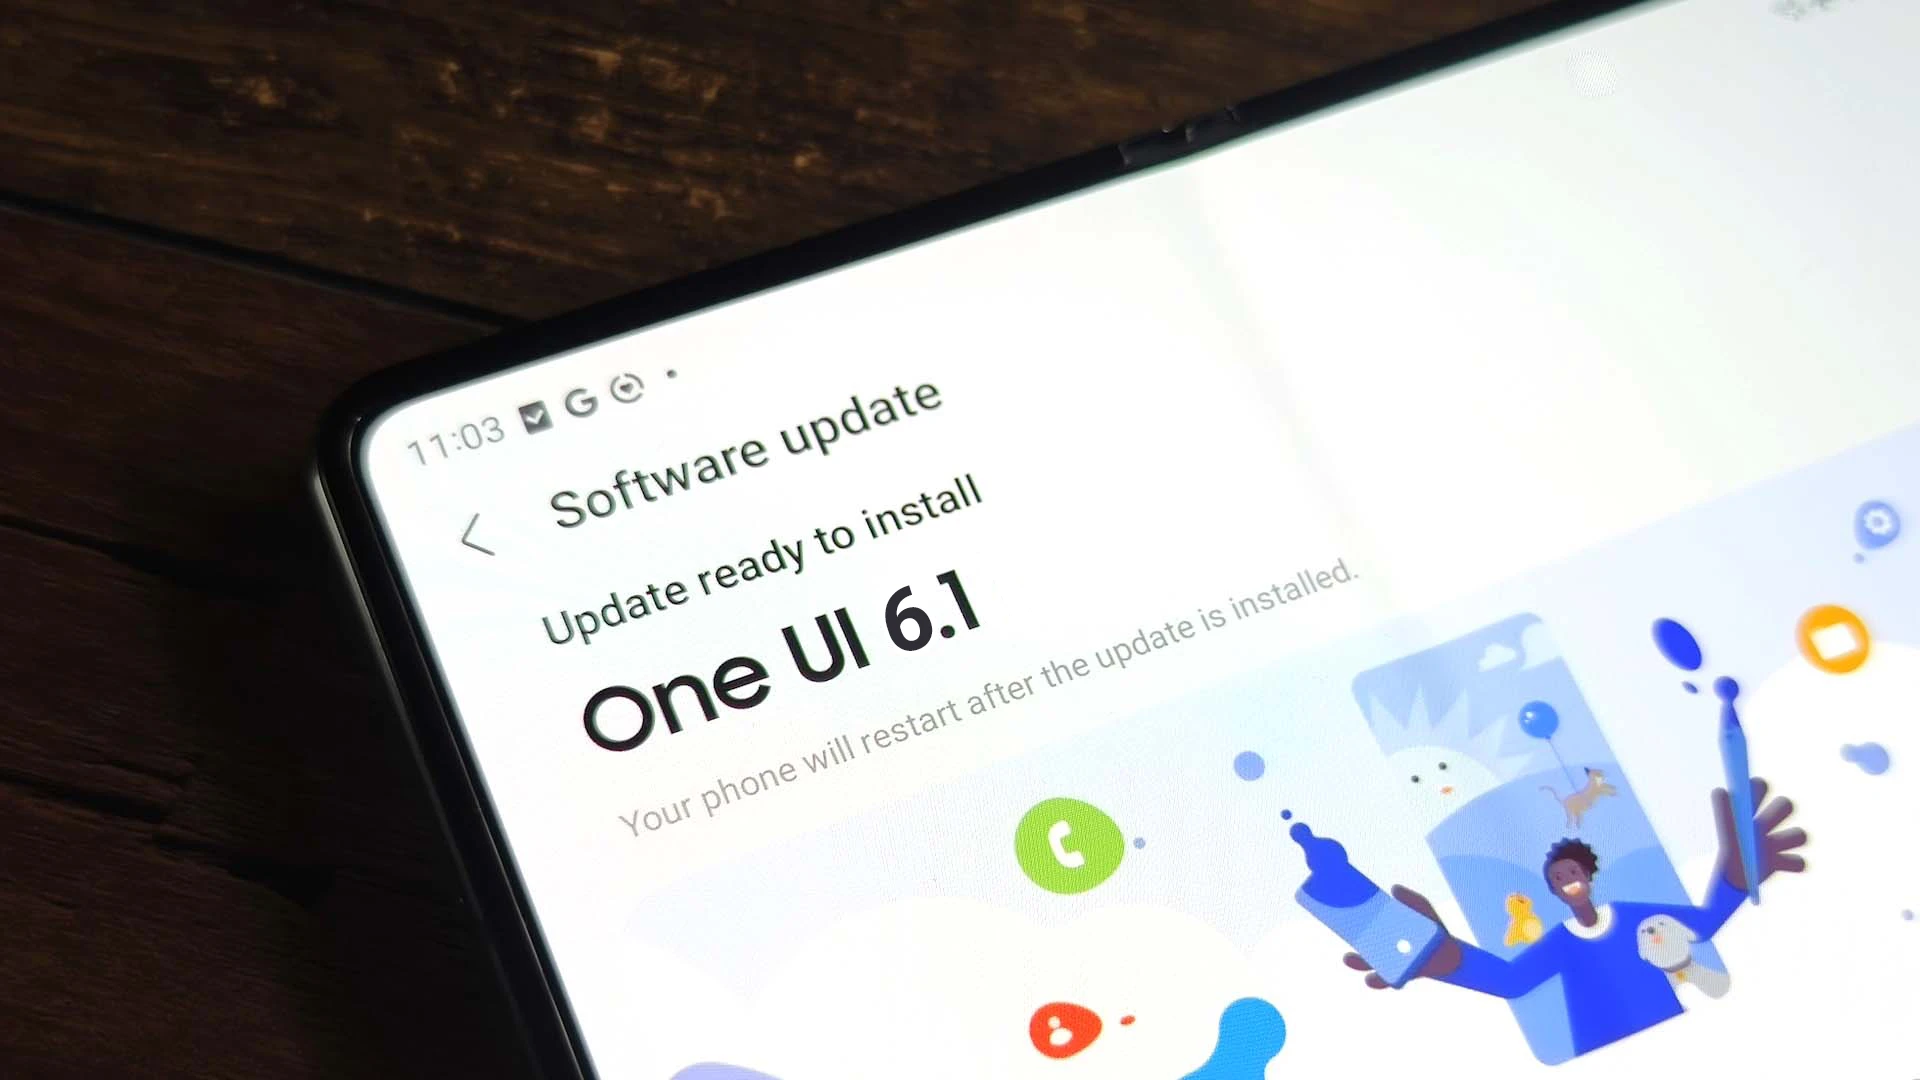 Everything we know so far about the OneUI 6.1 update